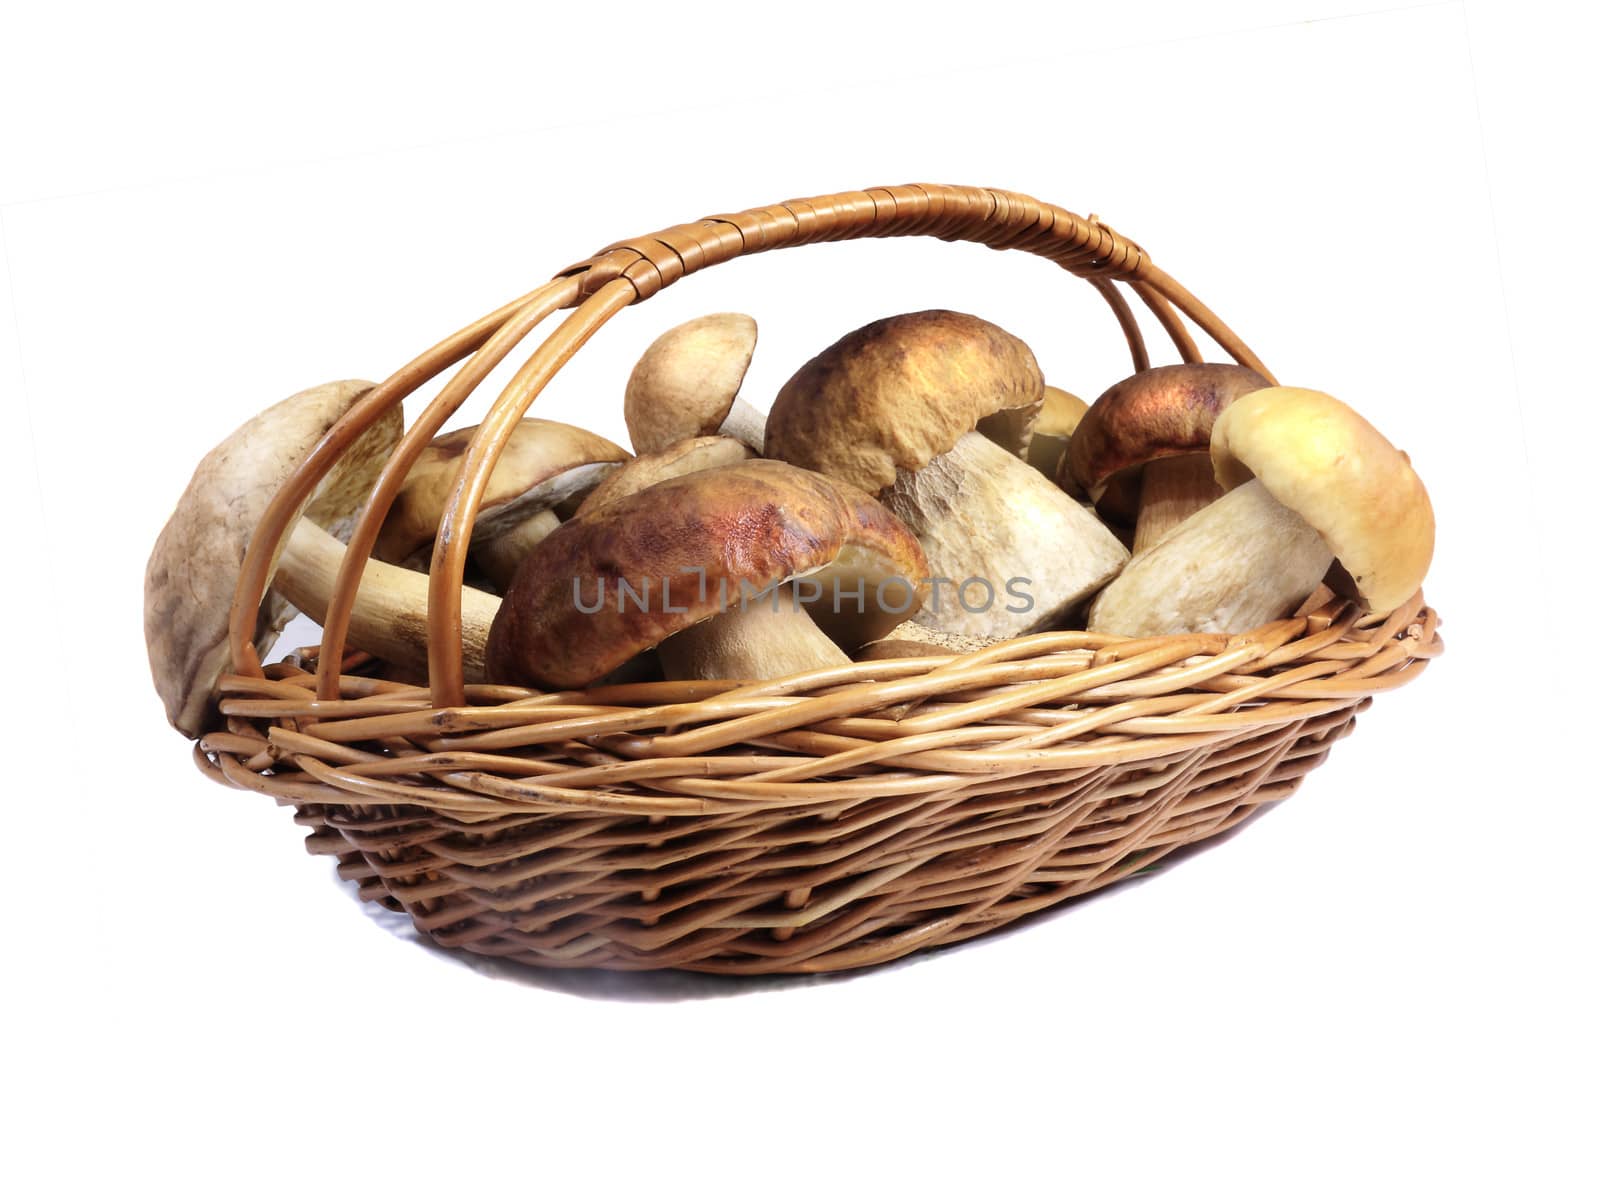 Mushrooms in a wicker basket on a white background. by georgina198